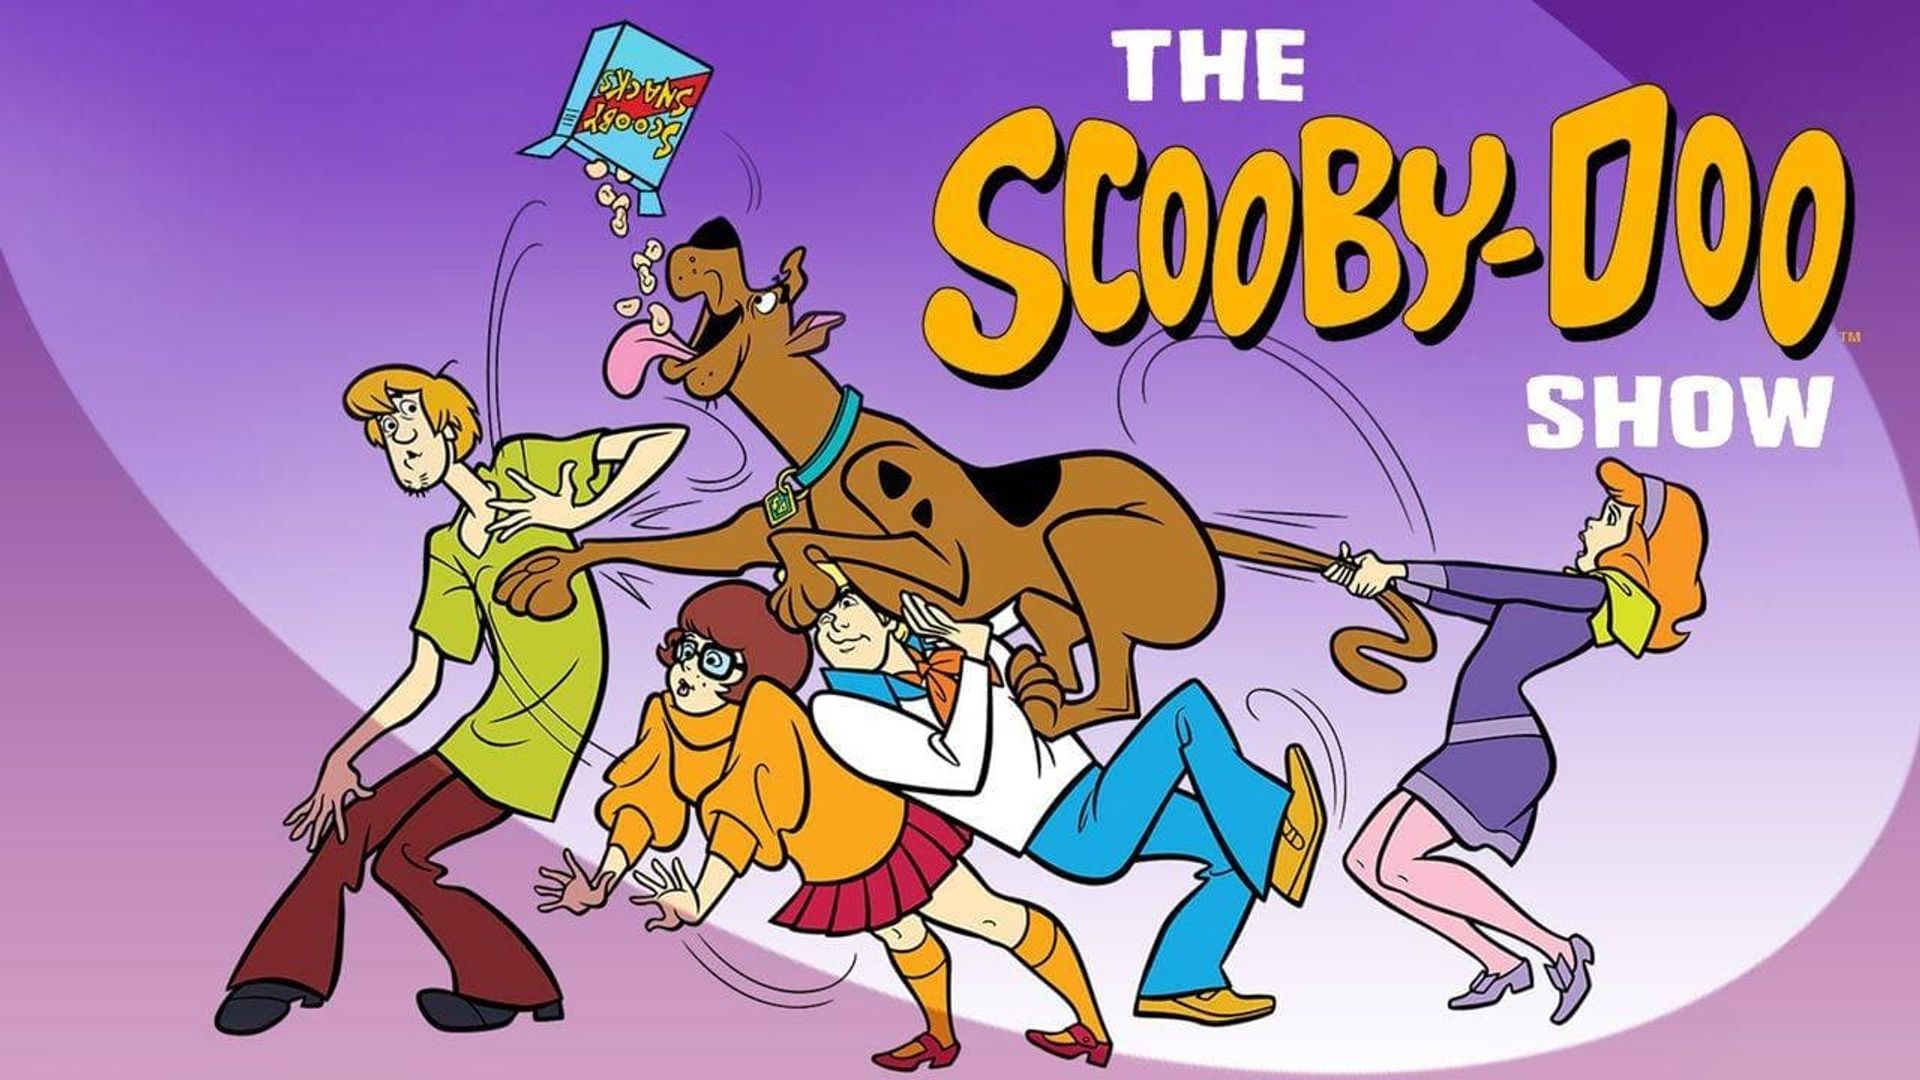 The Scooby-Doo Show background